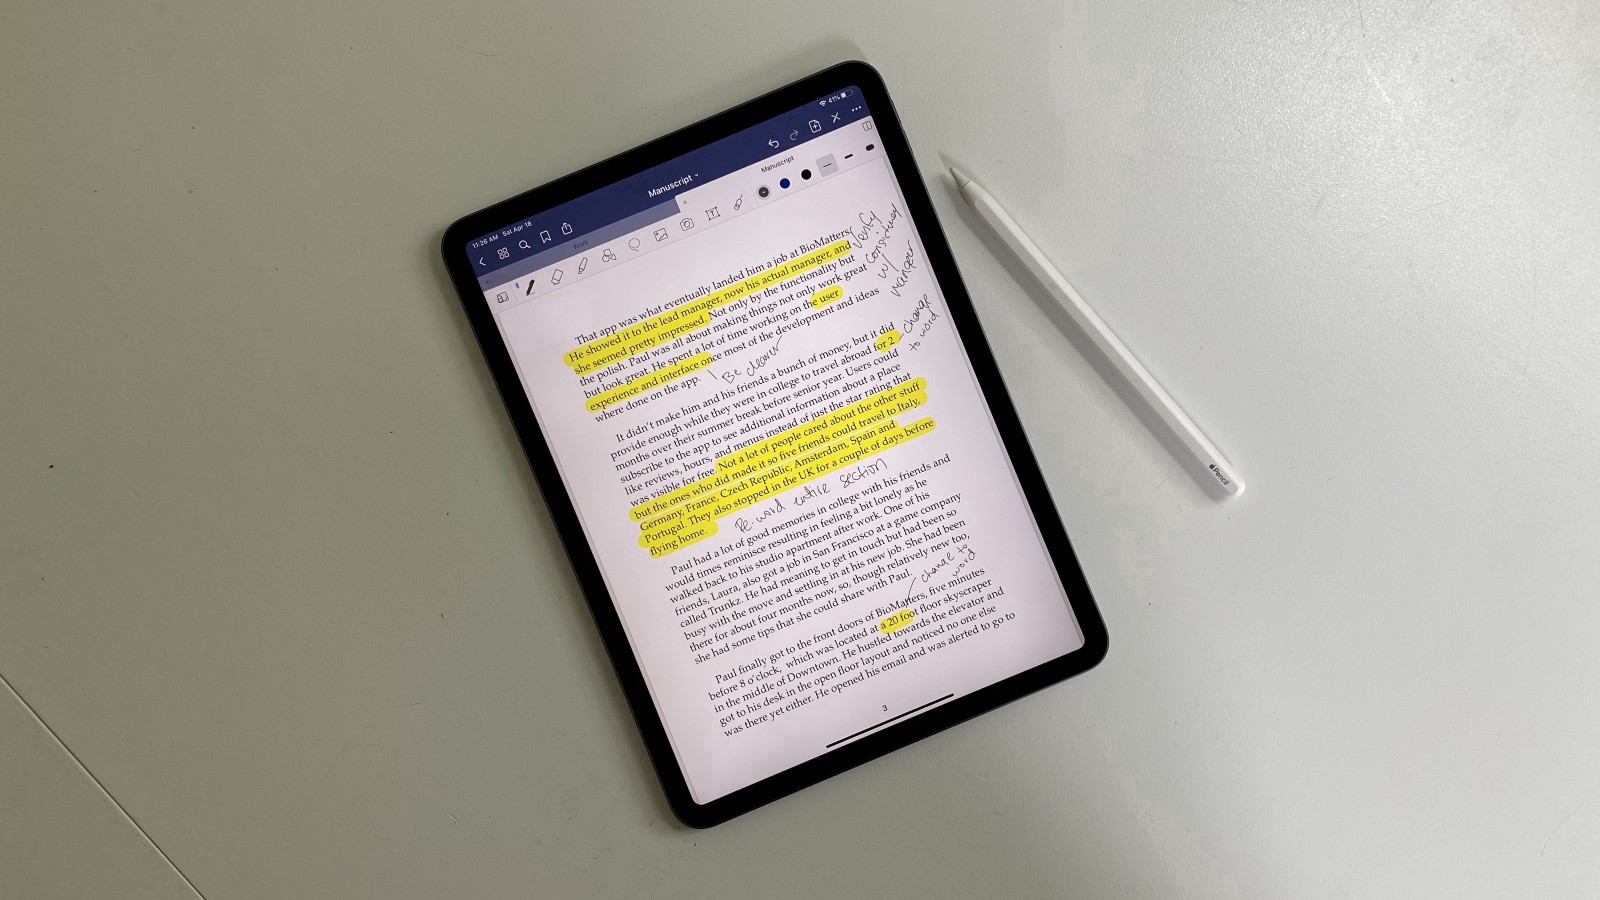 iPad Pro 11-inch with Apple Pencil using GoodNotes